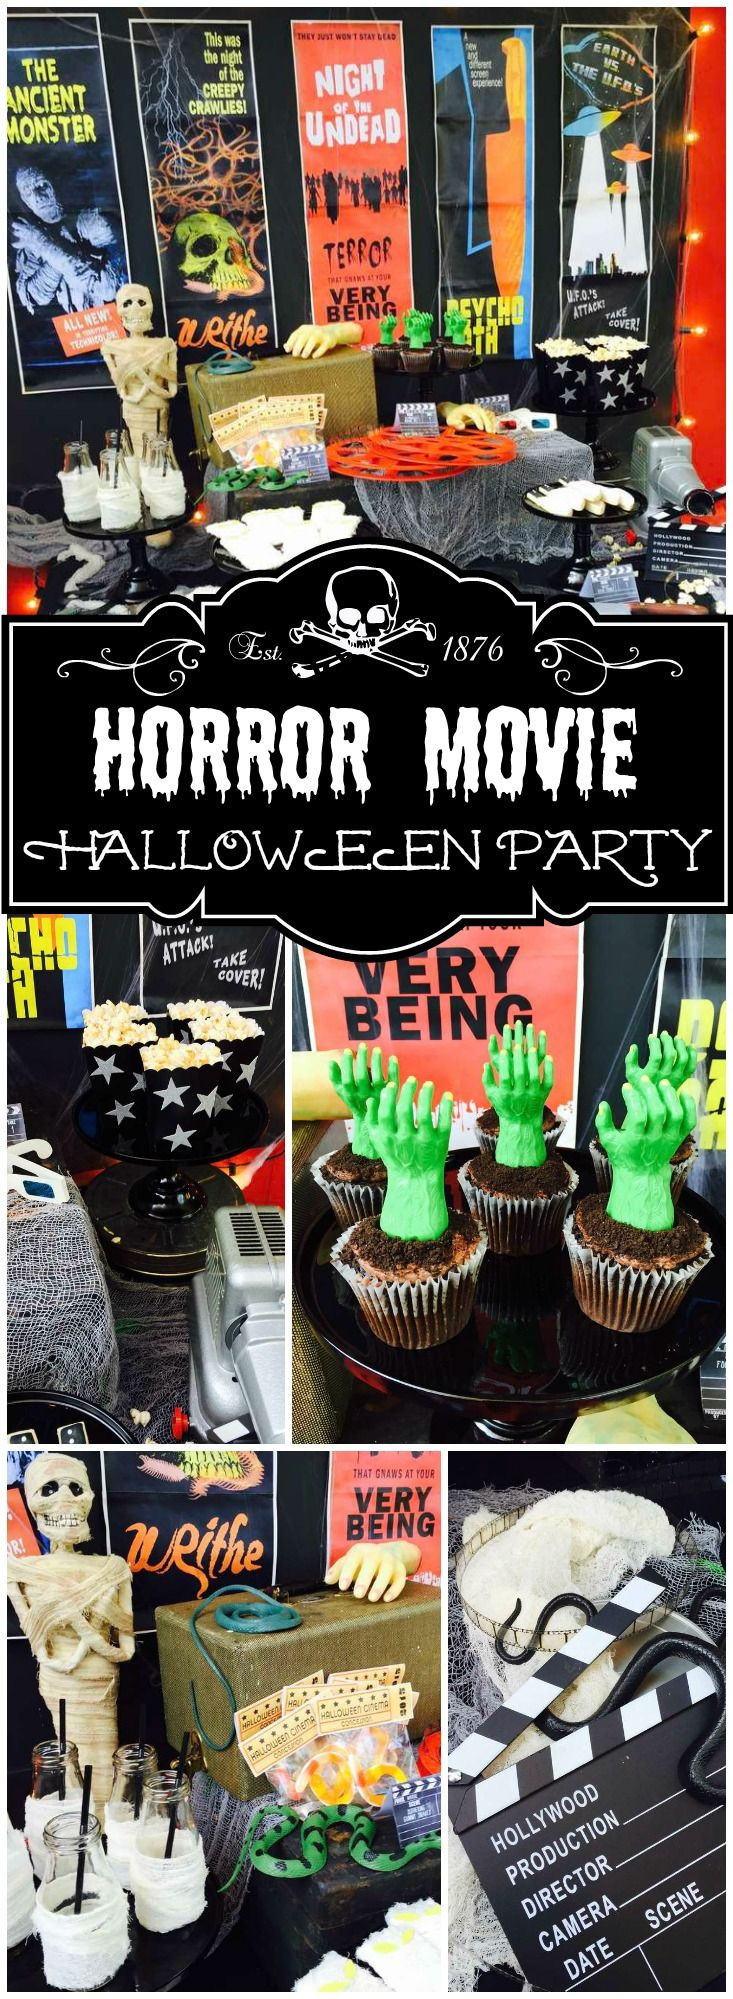 Halloween Movie Party Ideas
 How awesome is this vintage horror movie Halloween party